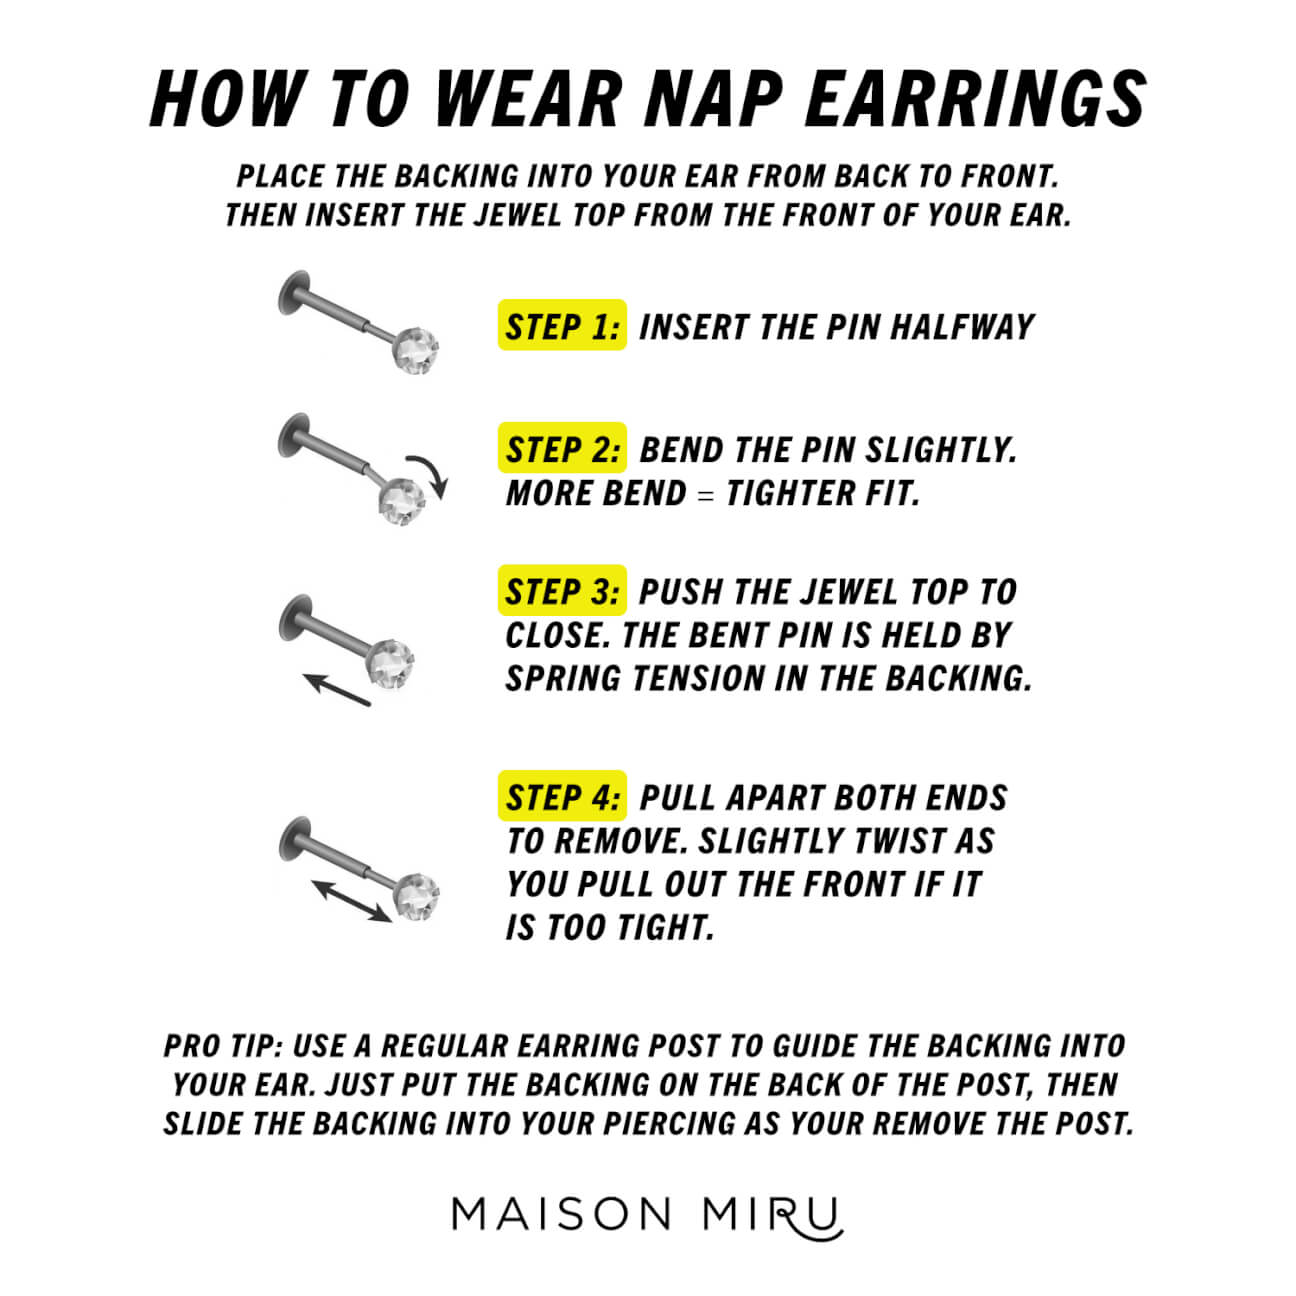 How to Wear the Classic Star Nap Earrings